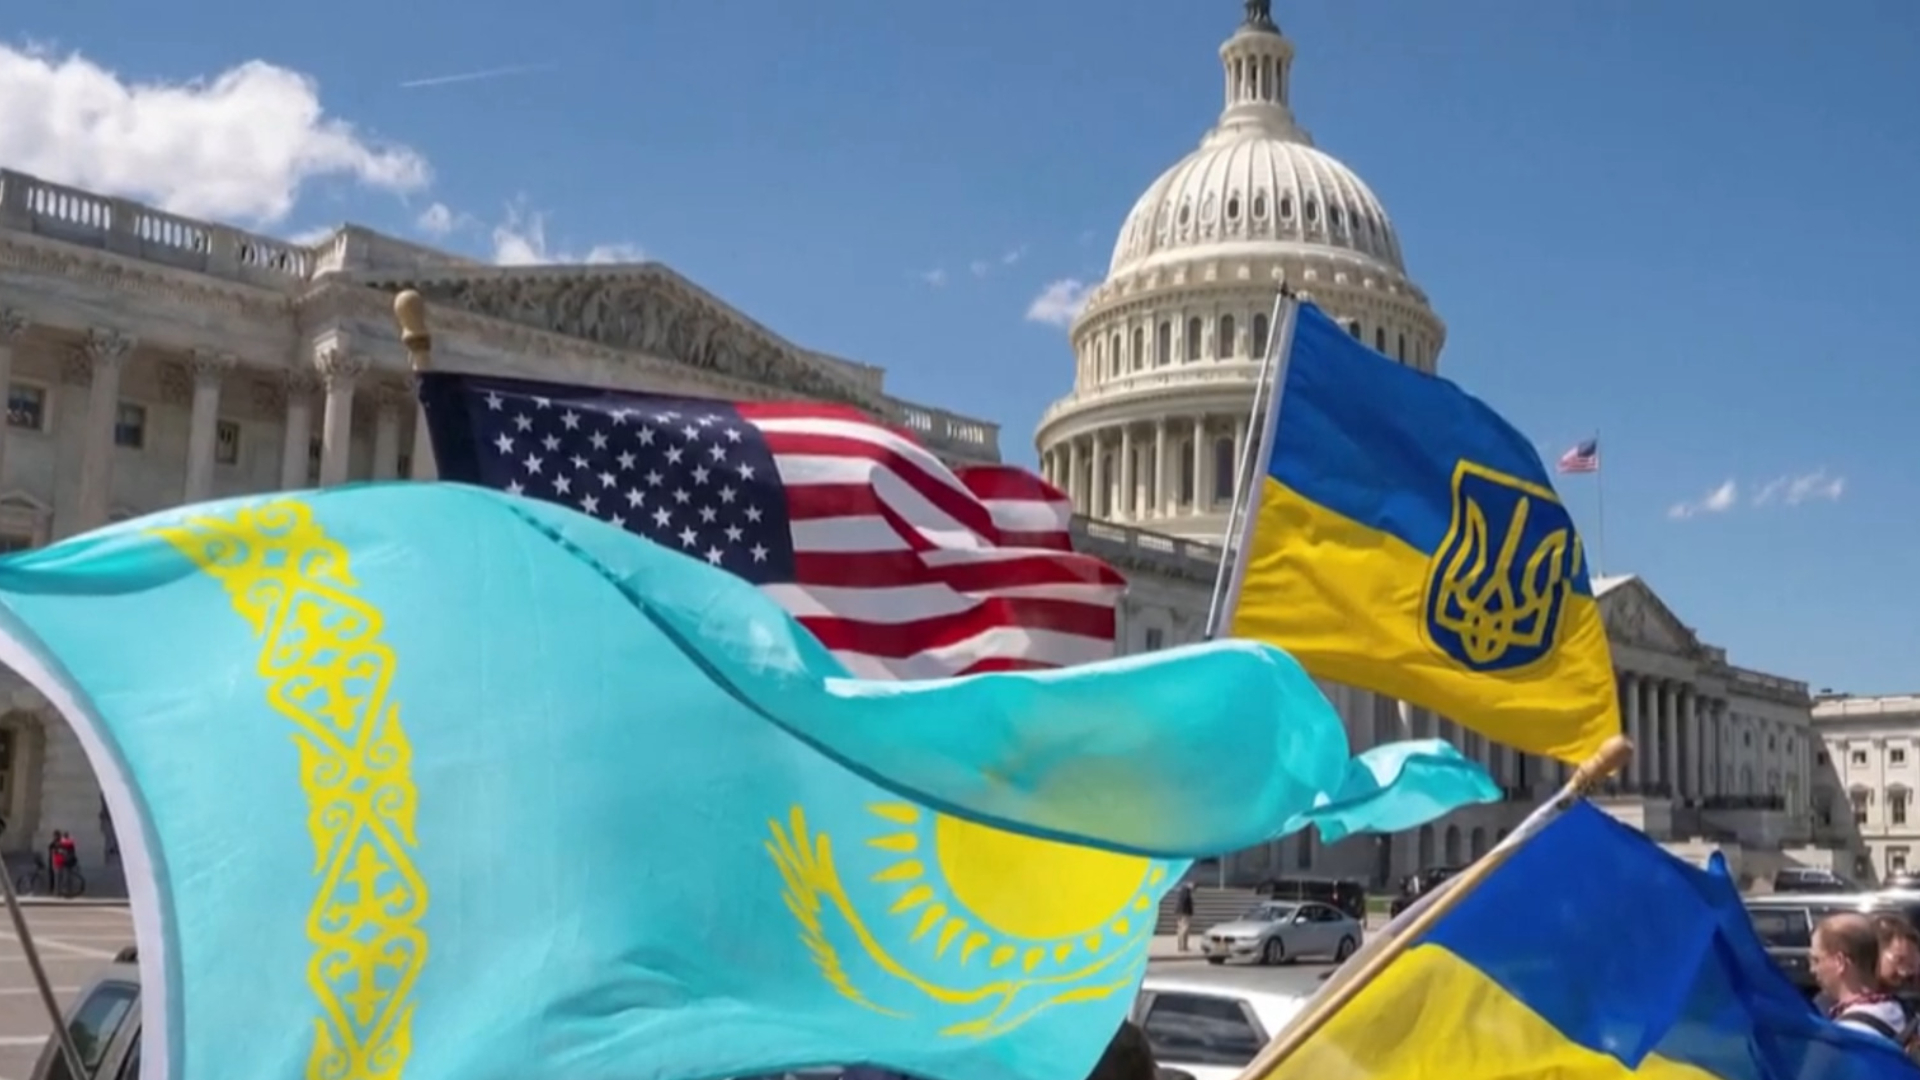 Ukrainian soldiers rejoice over U.S house aid package, but say it was needed months ago